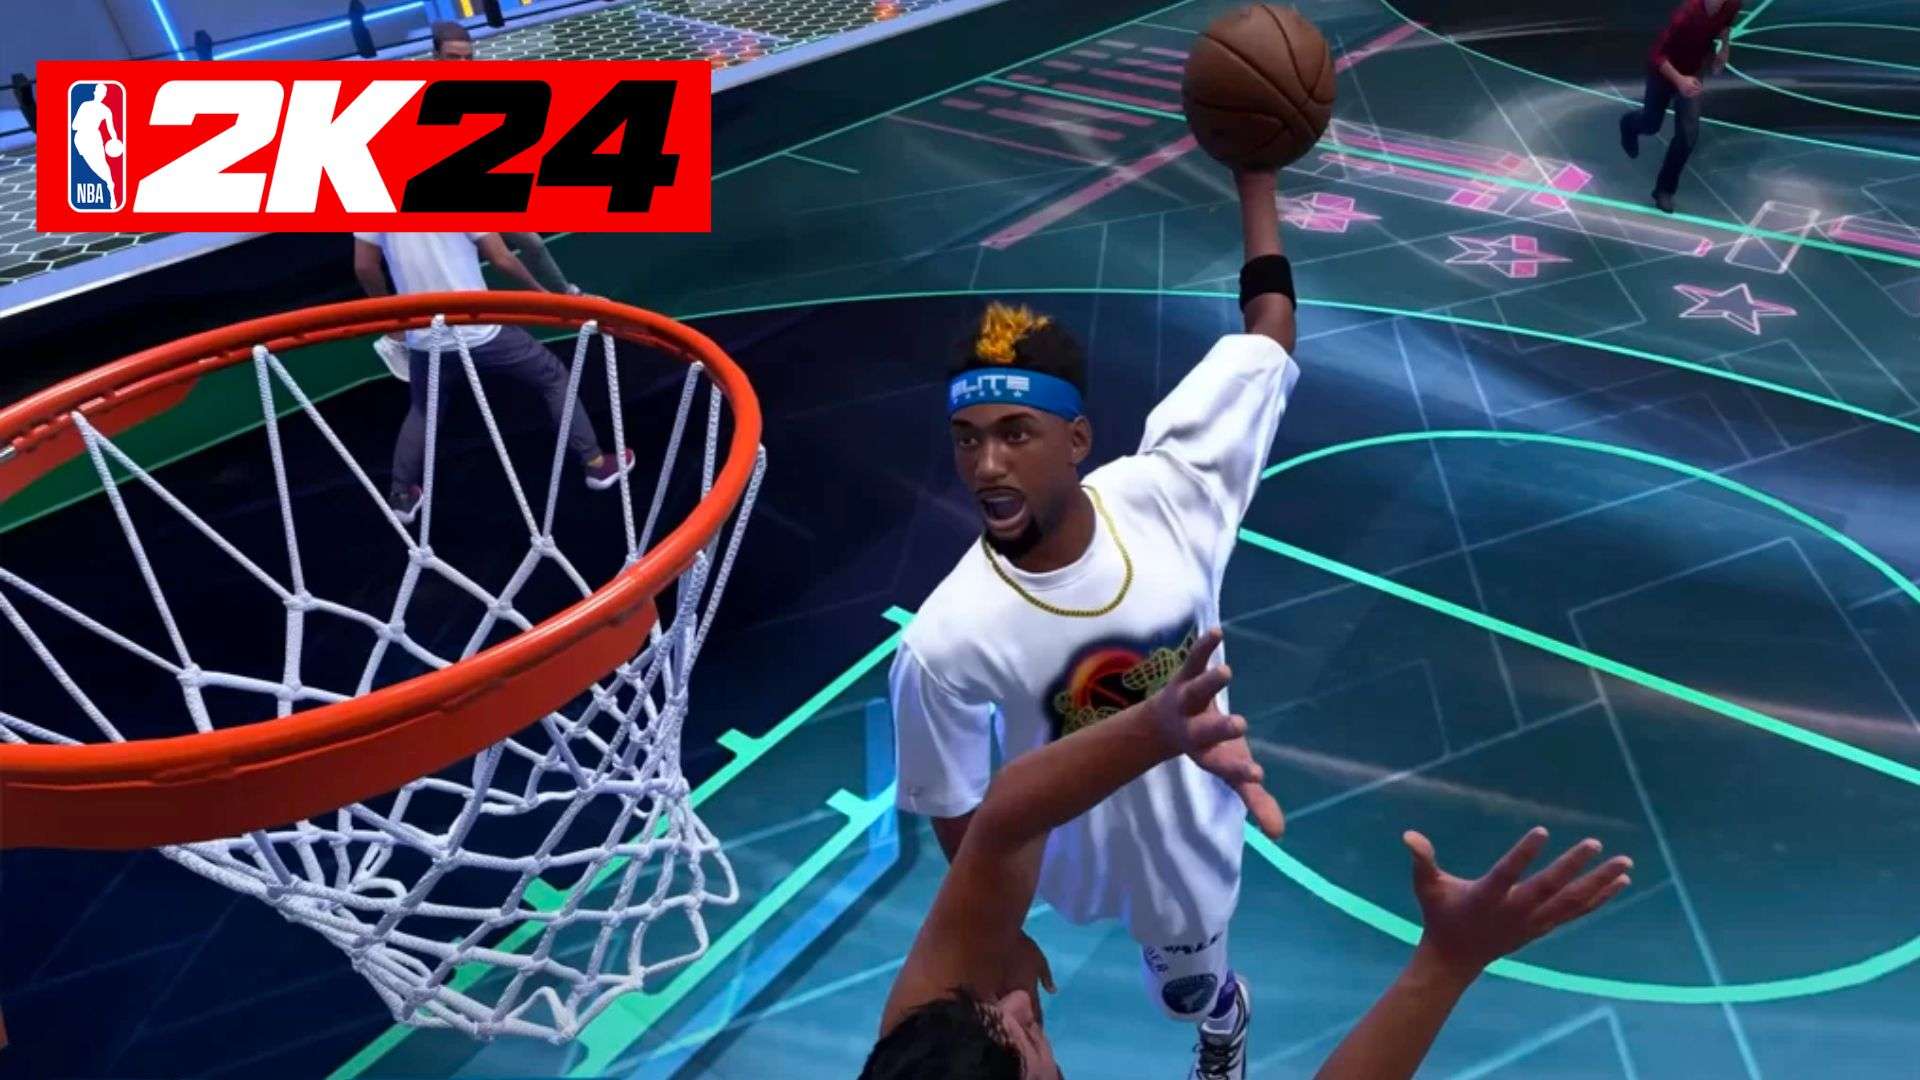 NBA 2K player dunking on opponent in Elite park in 2k24 with red logo